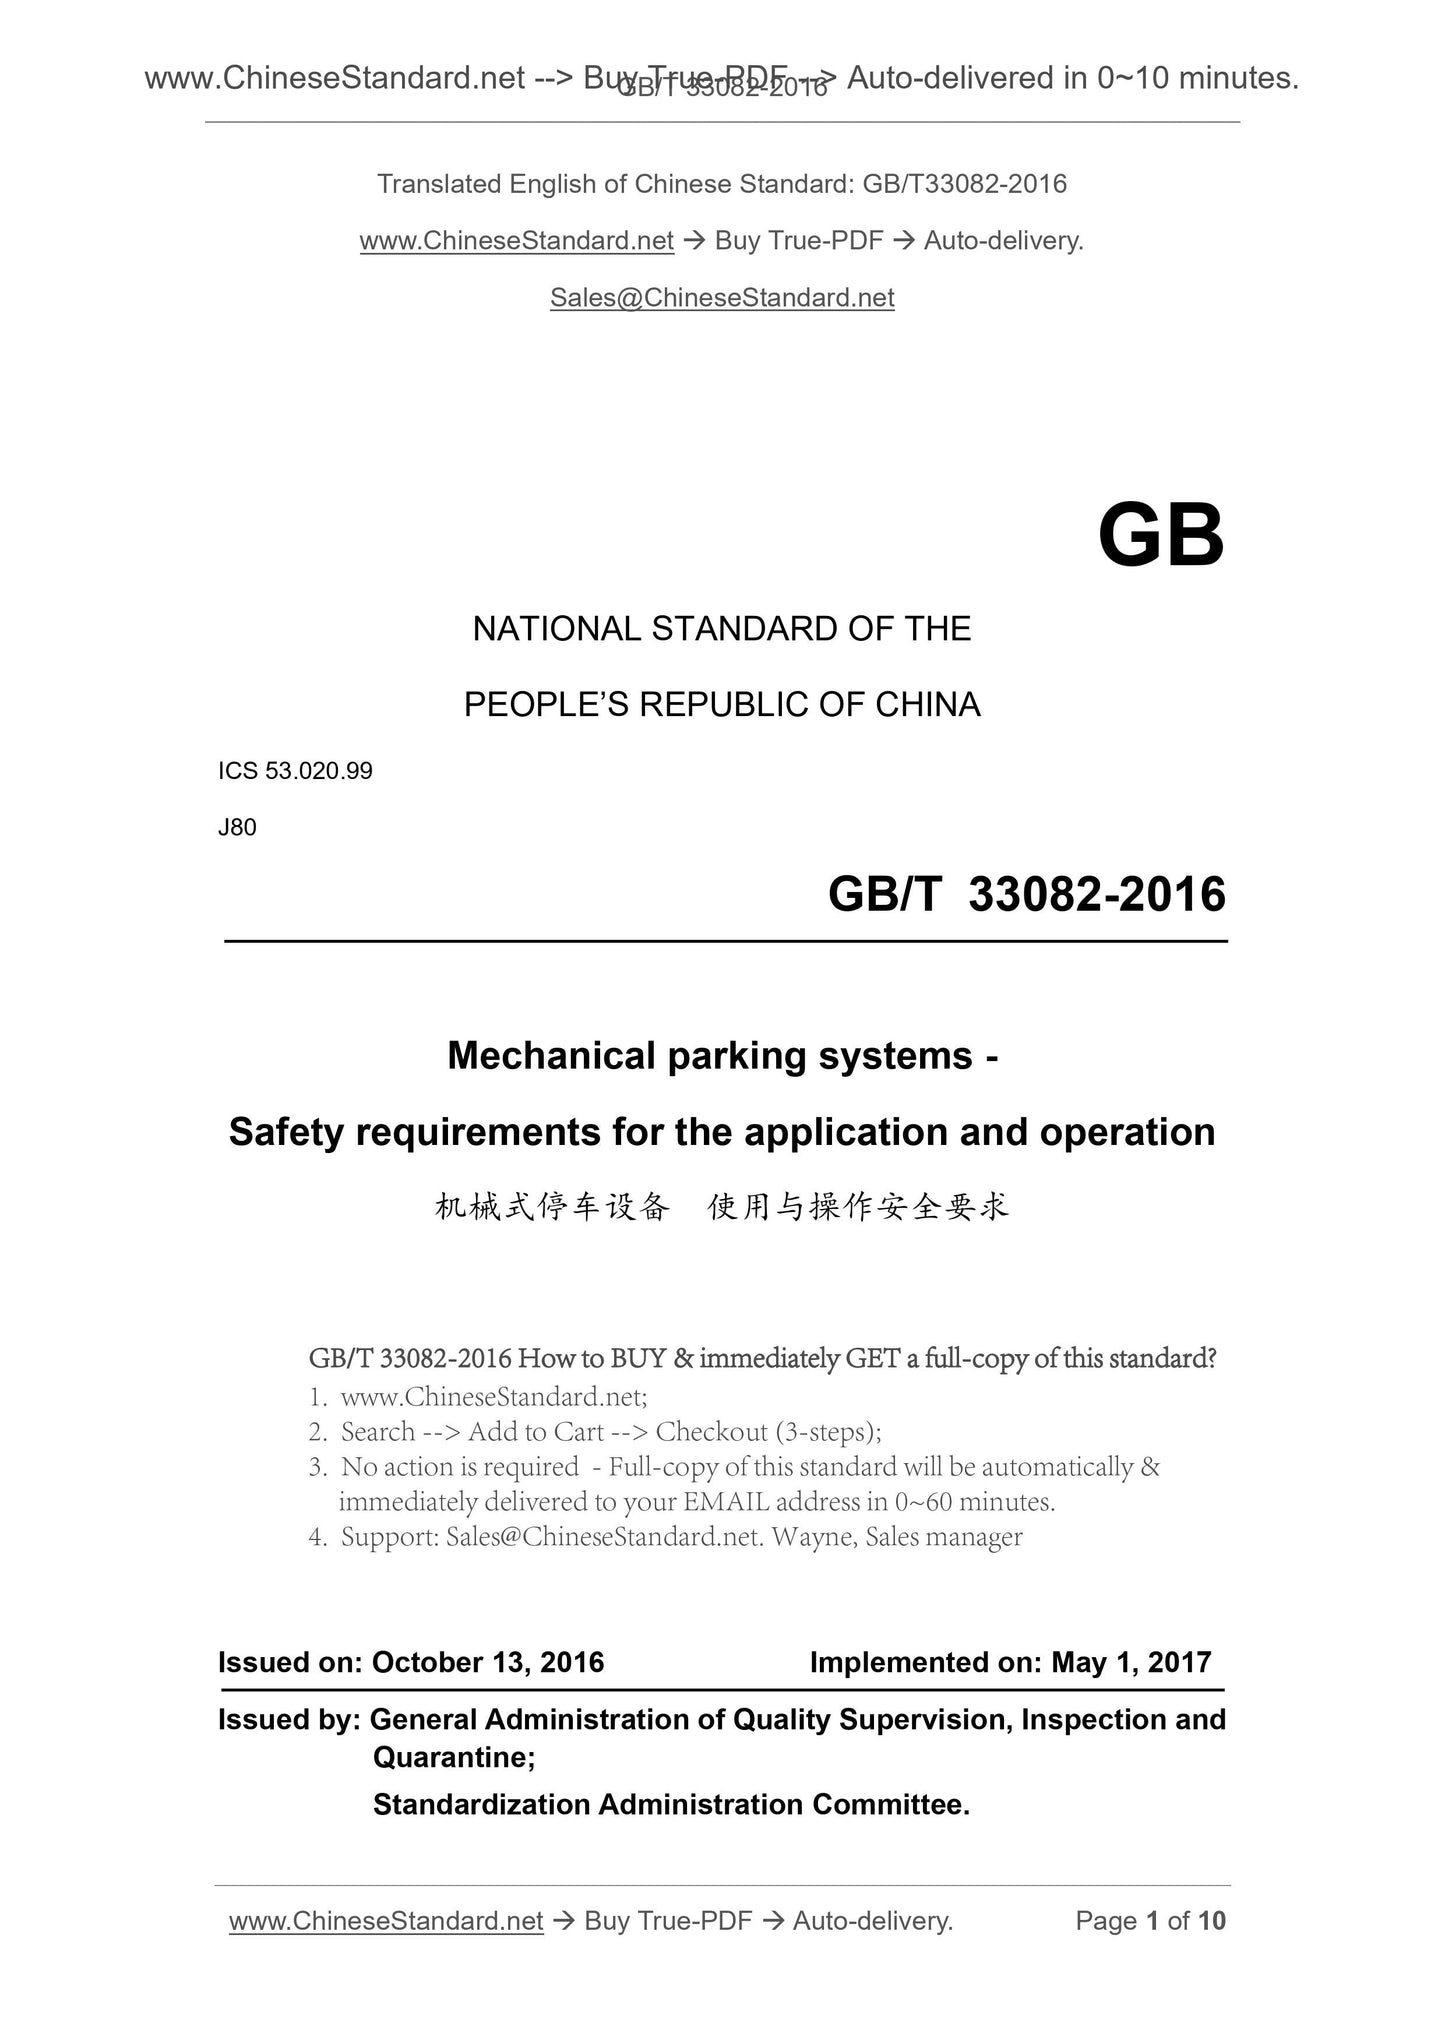 GB/T 33082-2016 Page 1